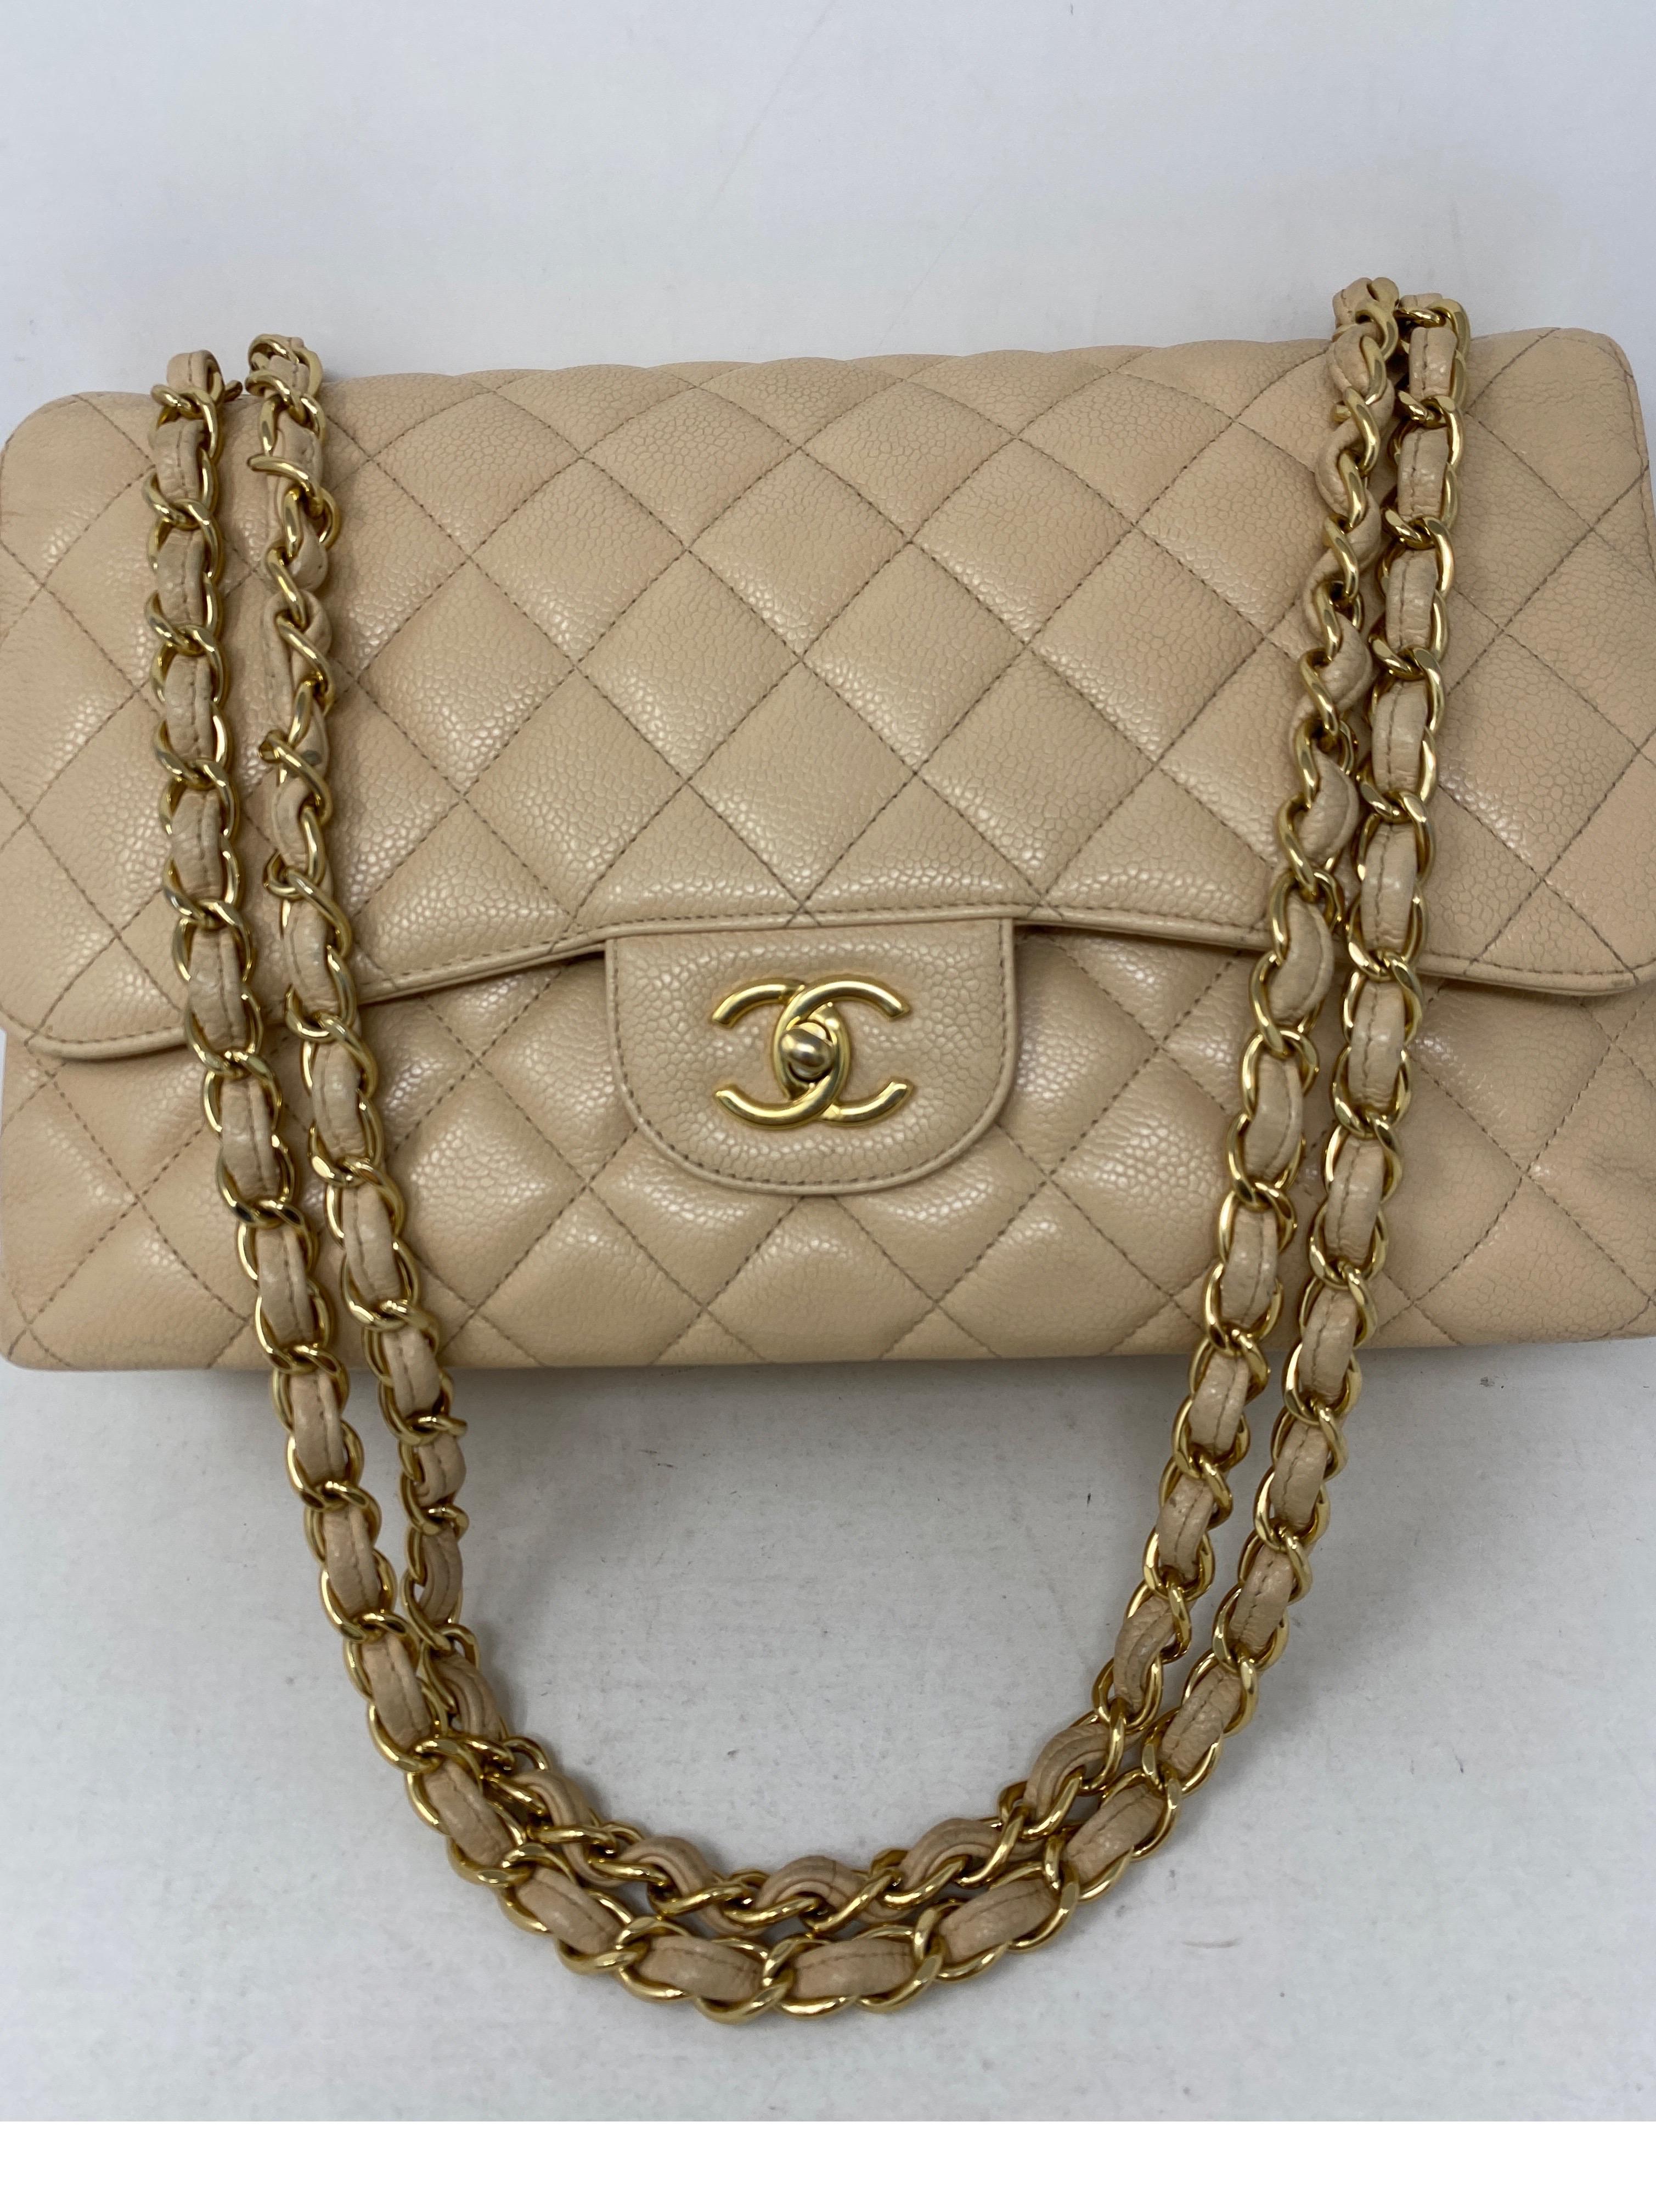 Chanel Cream Jumbo Double Flap Bag. Gold hardware. Good condition. Has light wear throughout. Caviar leather. Most wanted size jumbo. Double flap classic. Clean interior. Can be worn as a crossbody or doubled as a shoulder bag. Guaranteed authentic. 